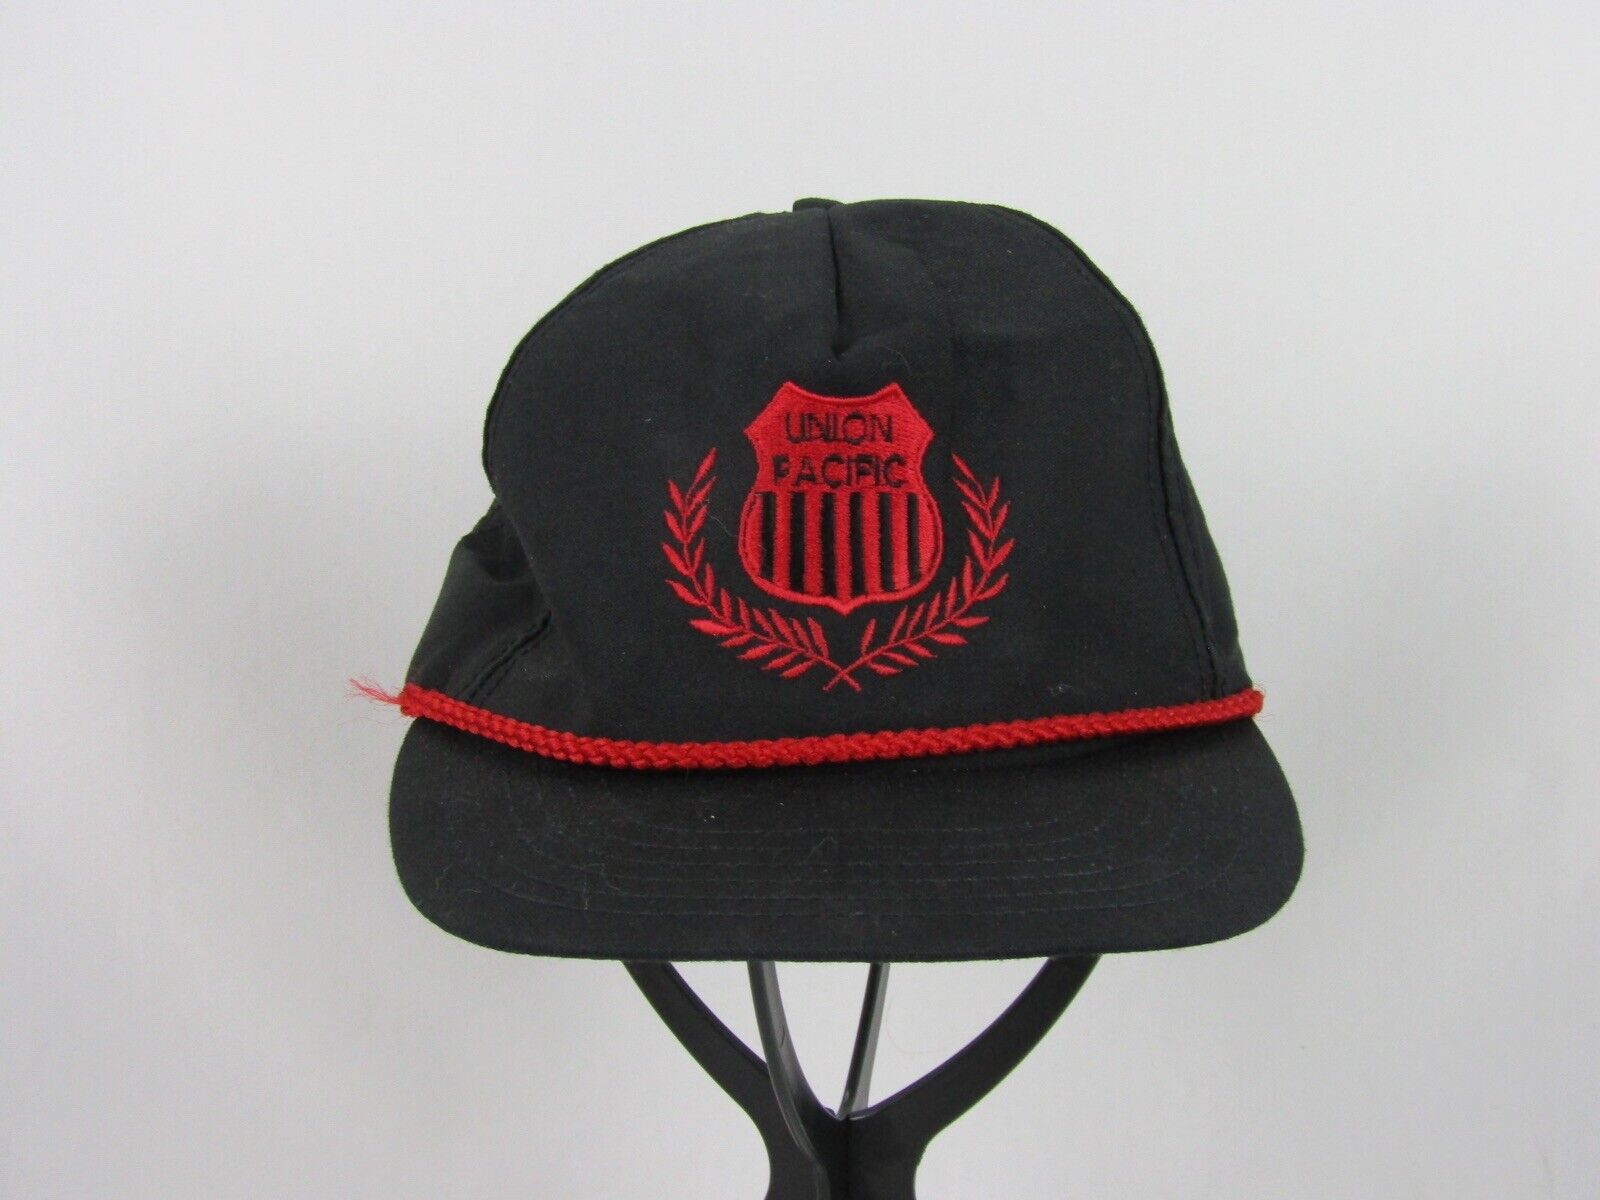 Vintage Red River Co. Union Pacific Cap-Black/Red w/Red Cord-Snapback-USA Made